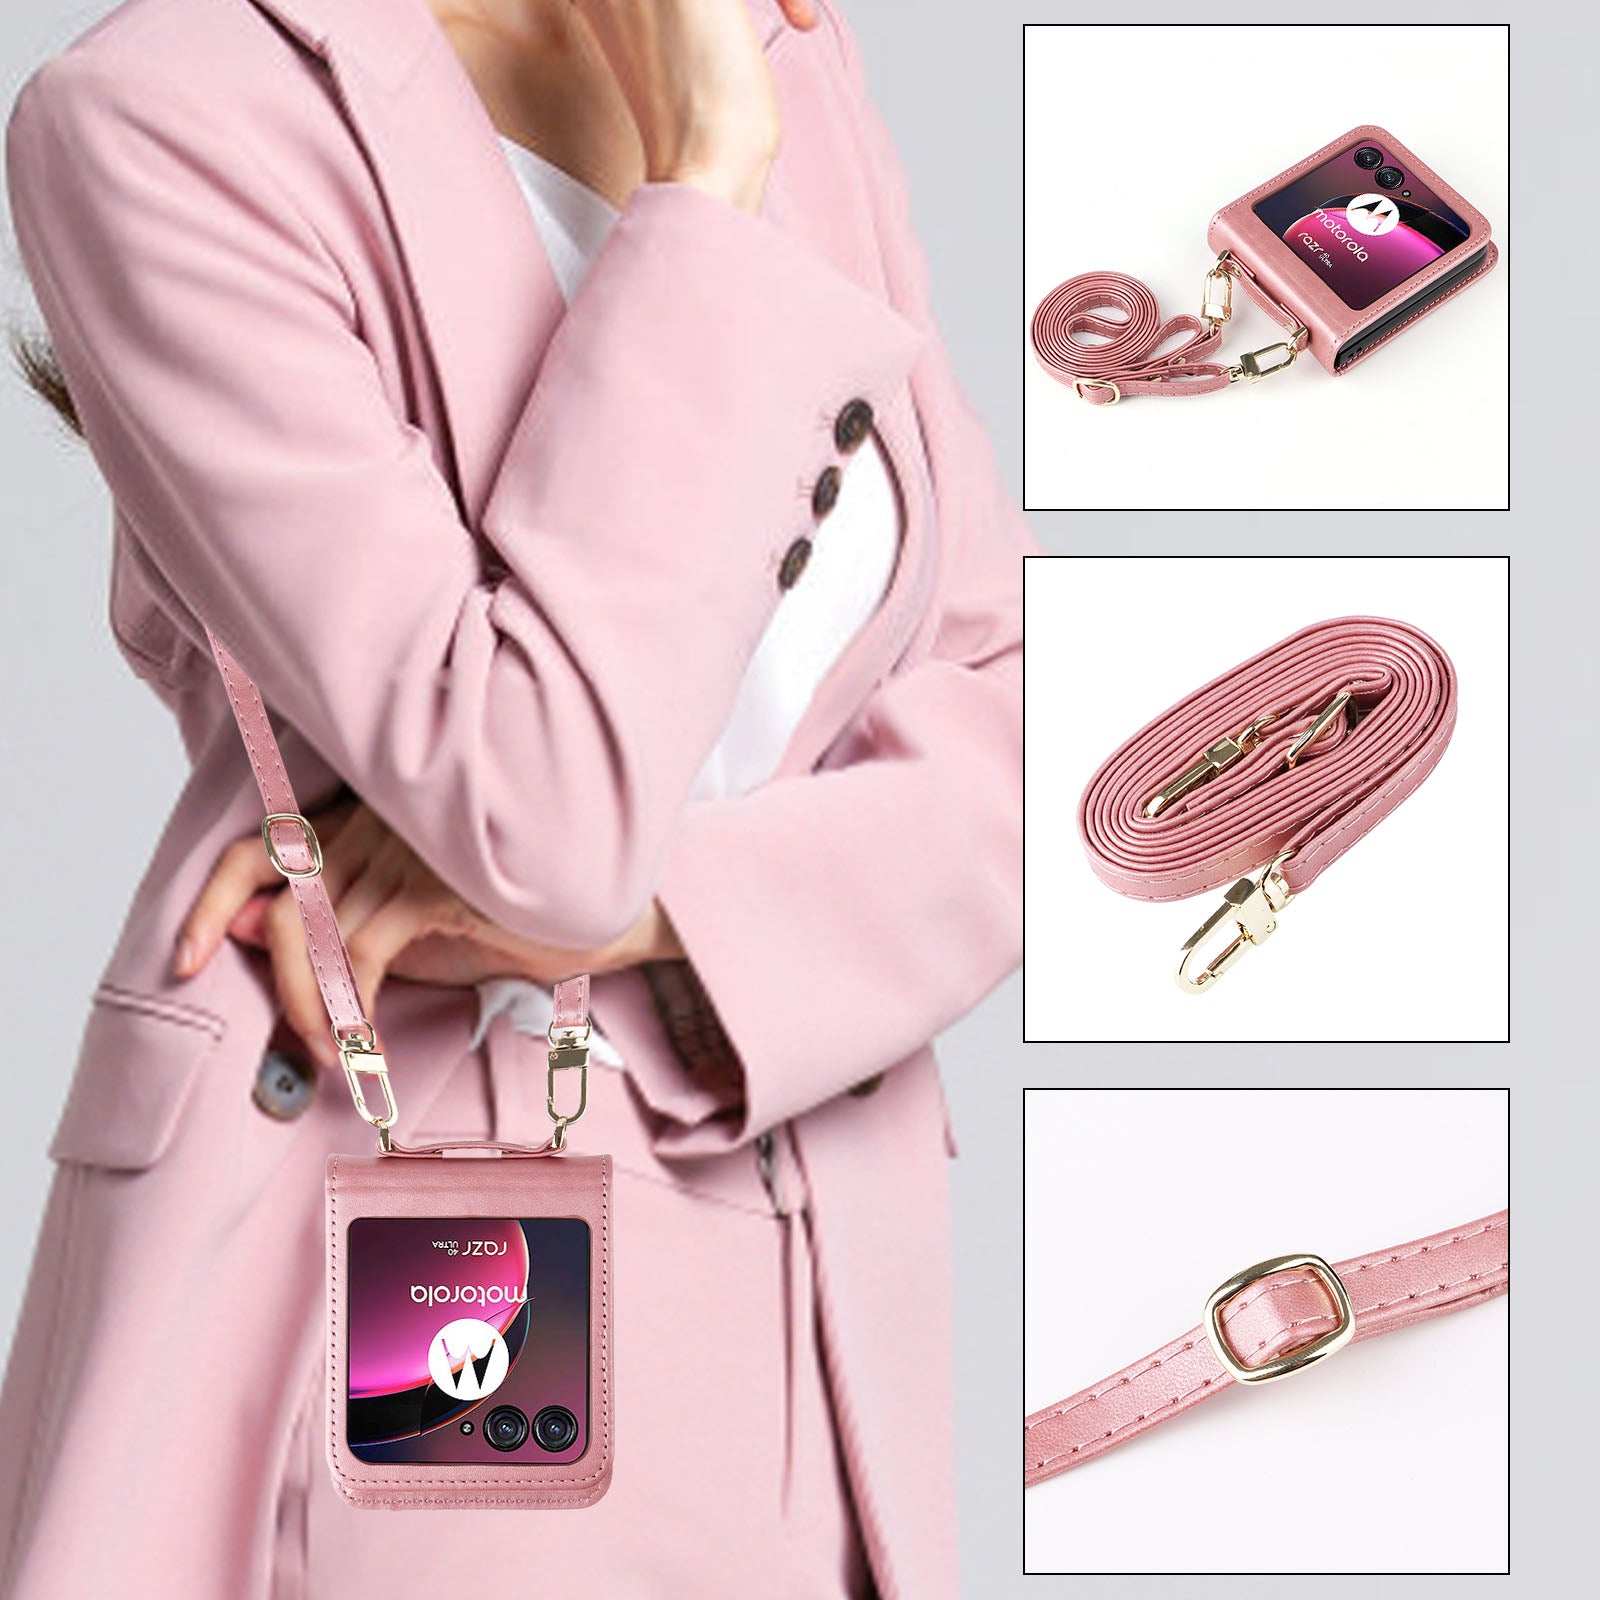 for Motorola Razr 40 Ultra 5G Hard PC + PU Leather Cover One-piece Design Card Slots Phone Case with Lanyard - Pink